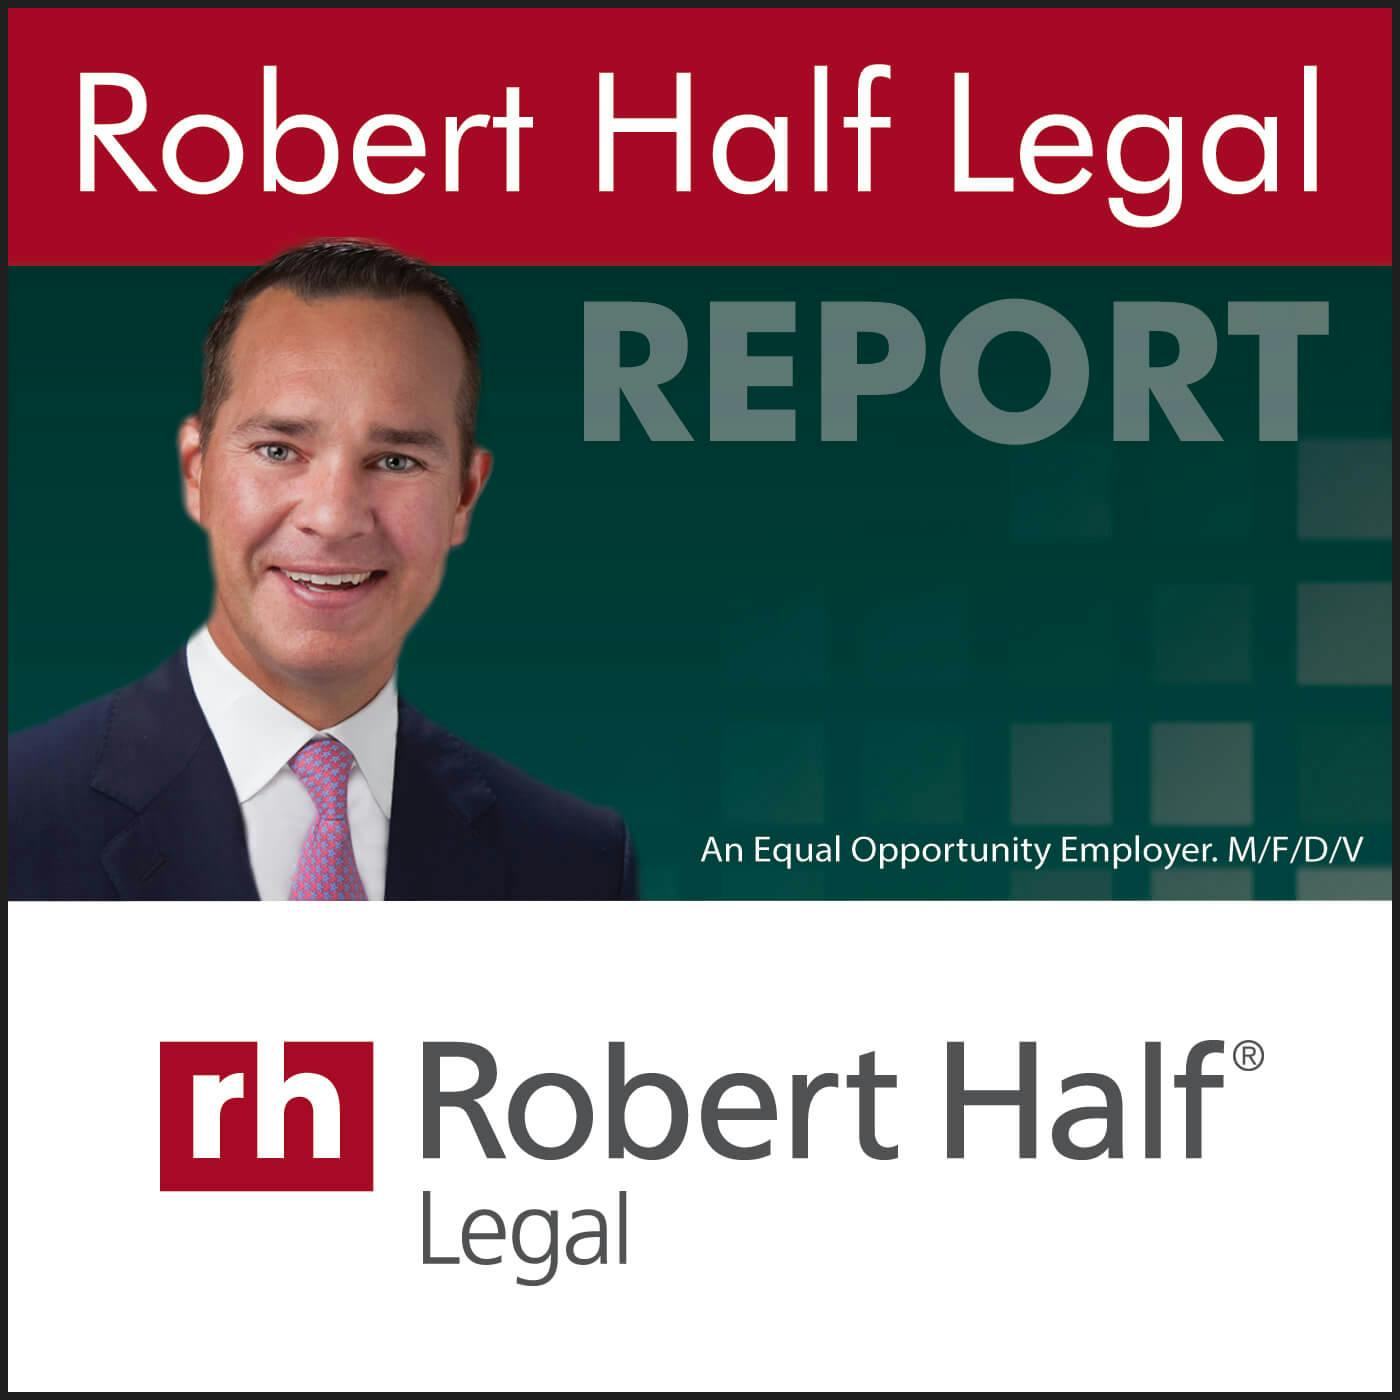 Key Hiring and Compensation Trends Shaping the Legal Profession in 2019